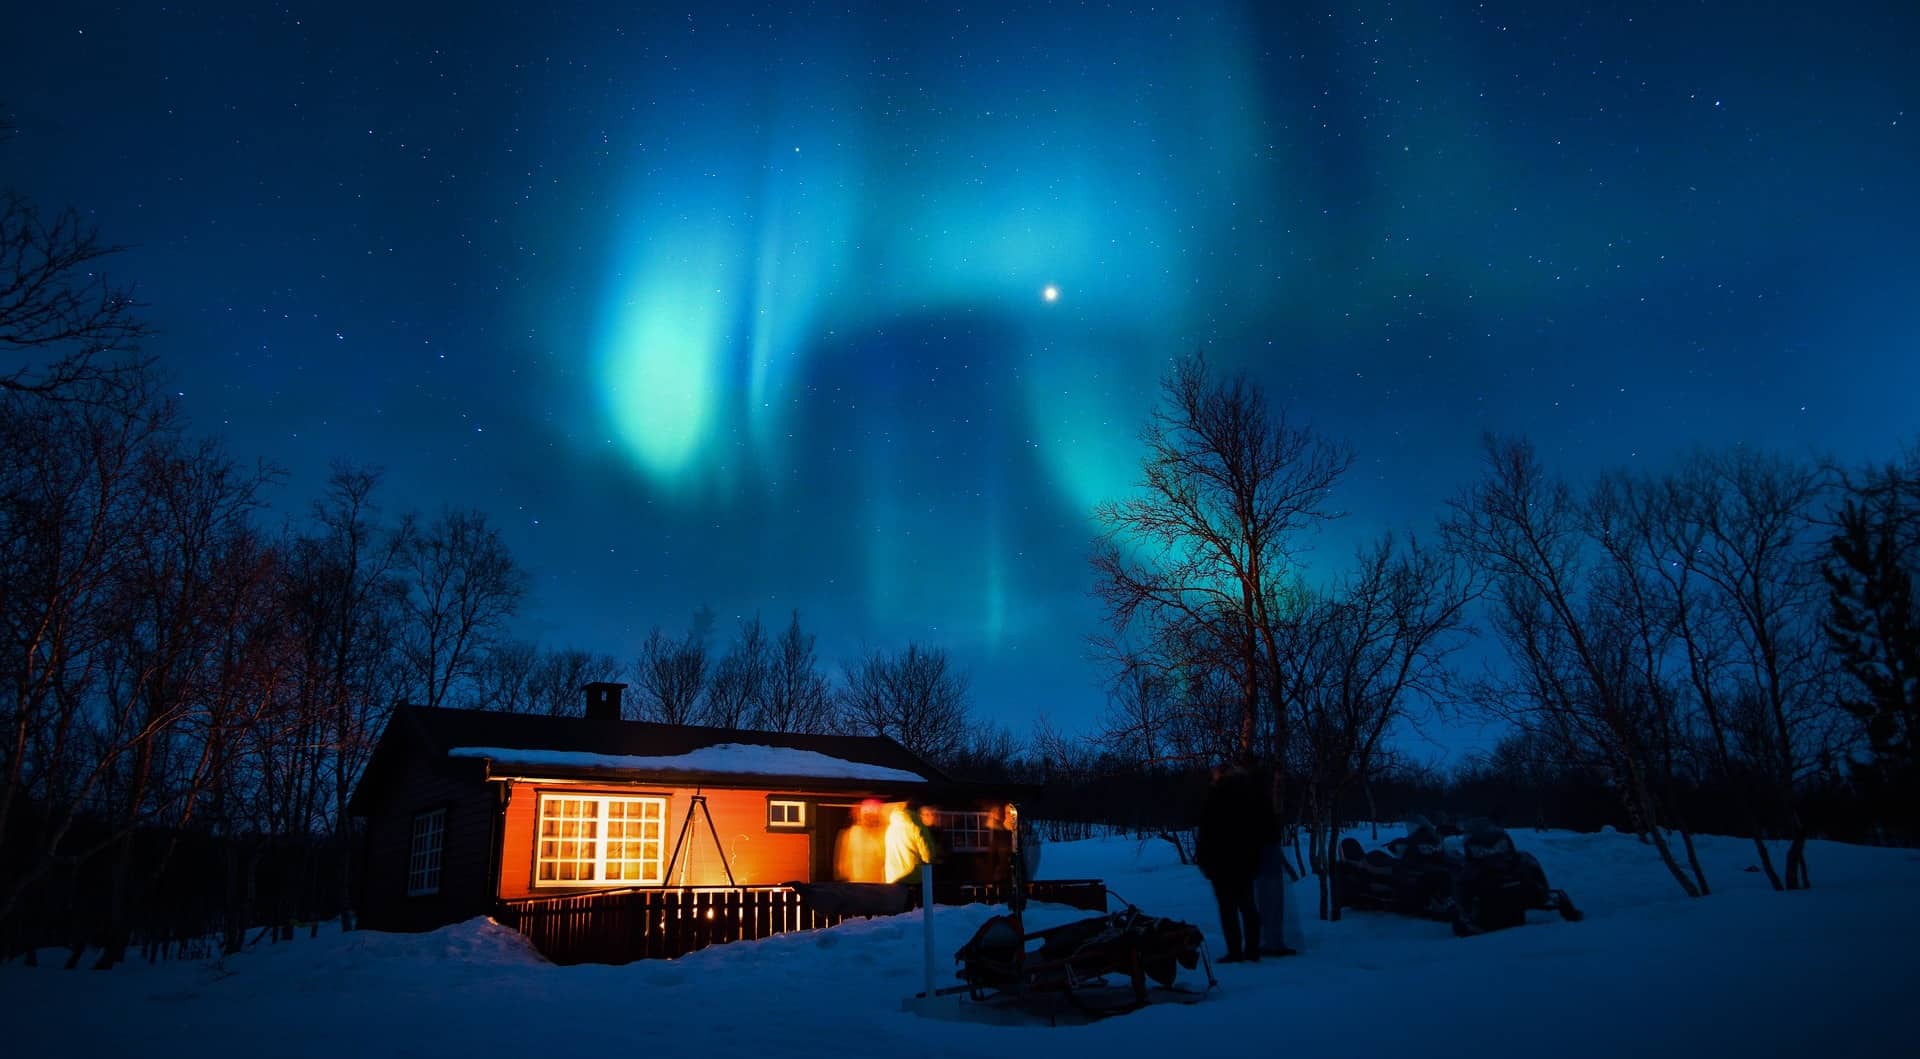 View the enchanting Northern Lights in Finland. From October to March you have the best chance of seeing the Northern Lights. A wonderful experience!